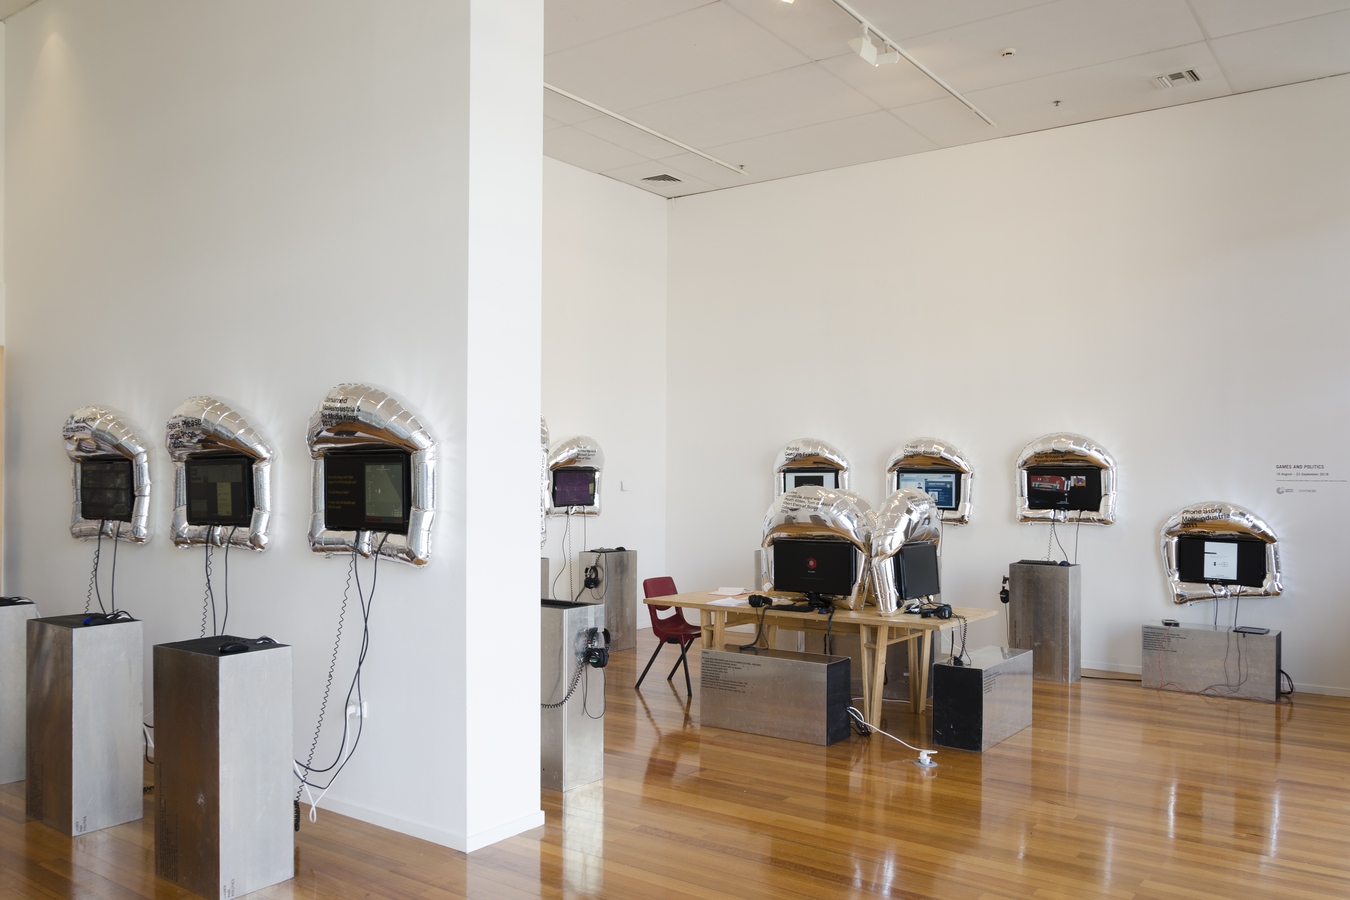 Games and Politics, installation view. Image: Mitchell Bright.